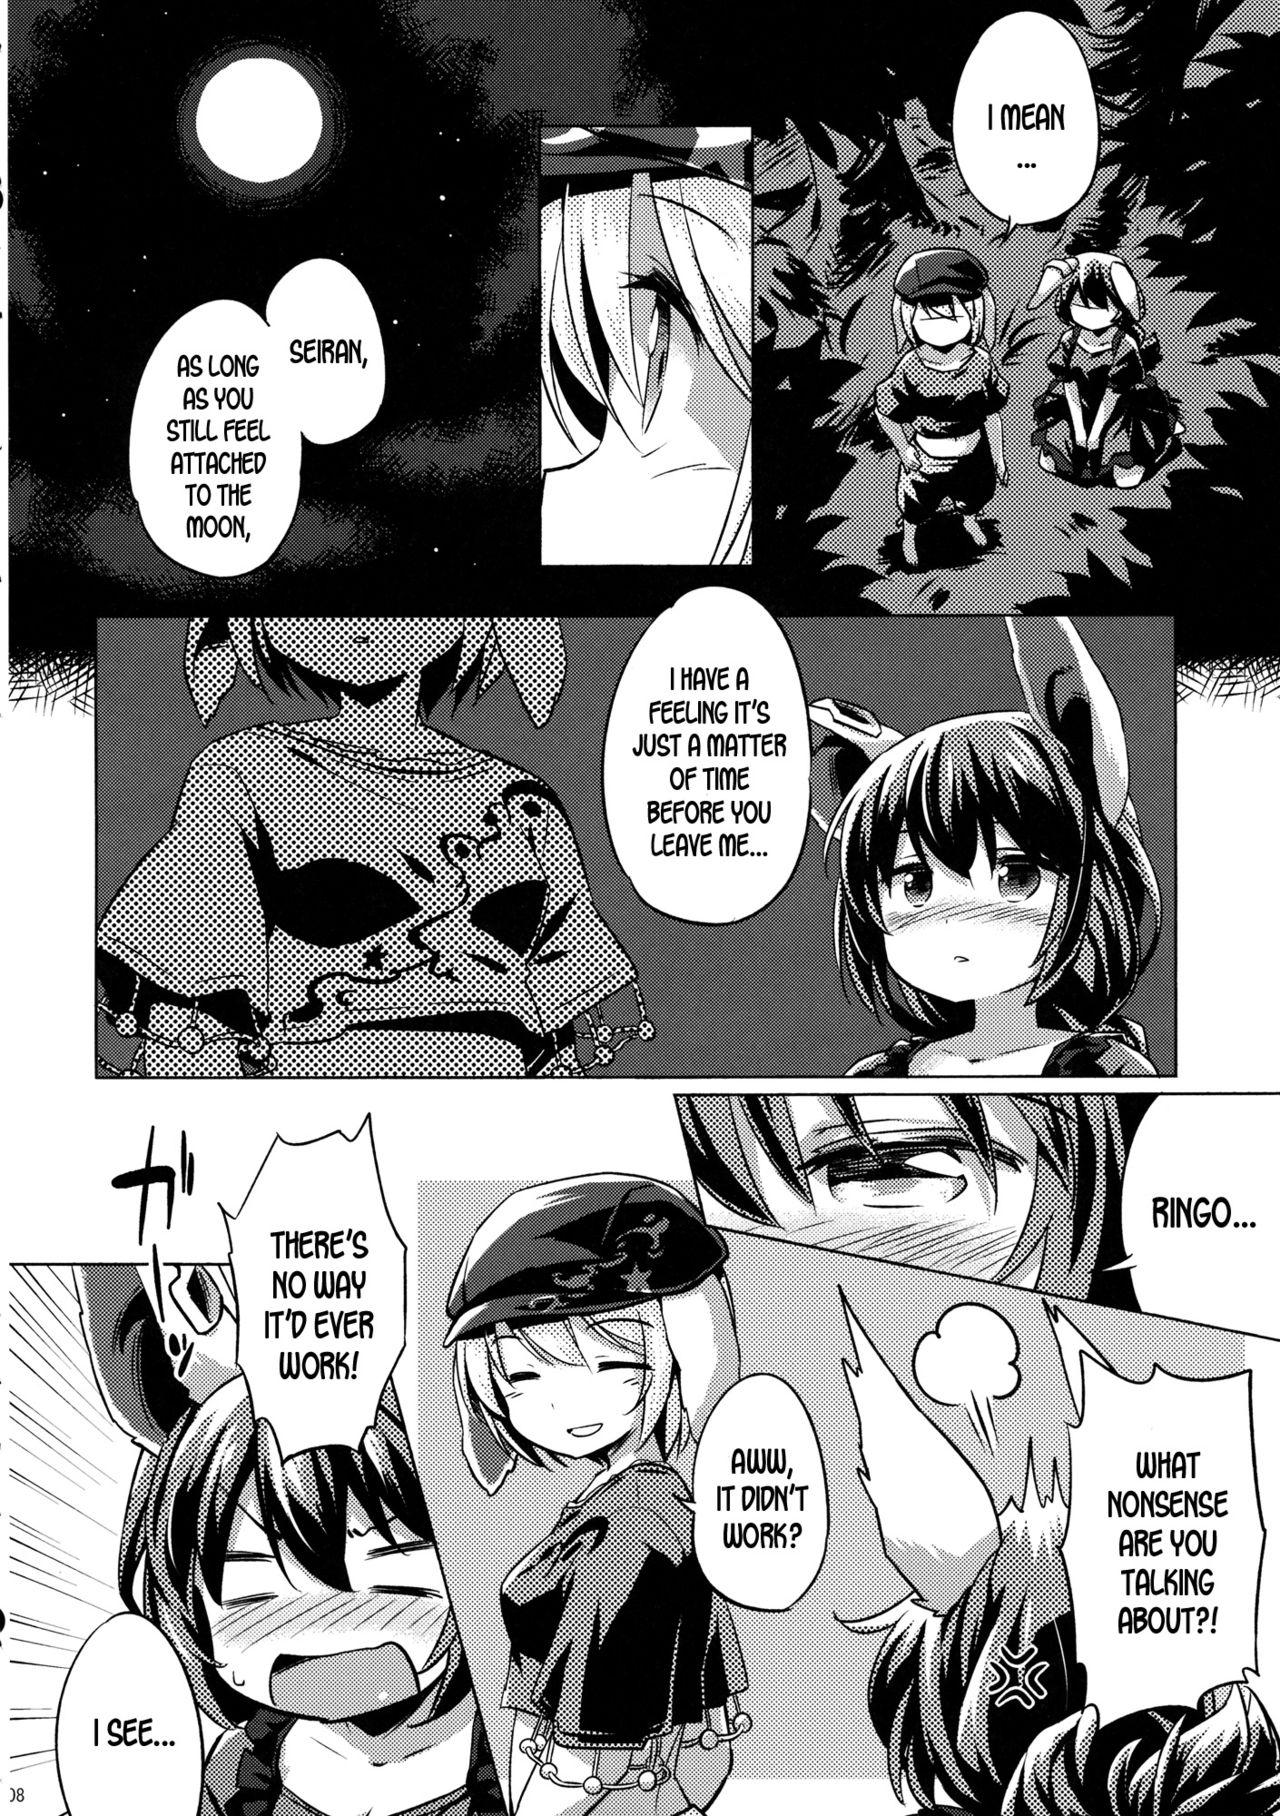 Caliente Speed Strike Seiran - Touhou project Free Amatuer Porn - Page 7